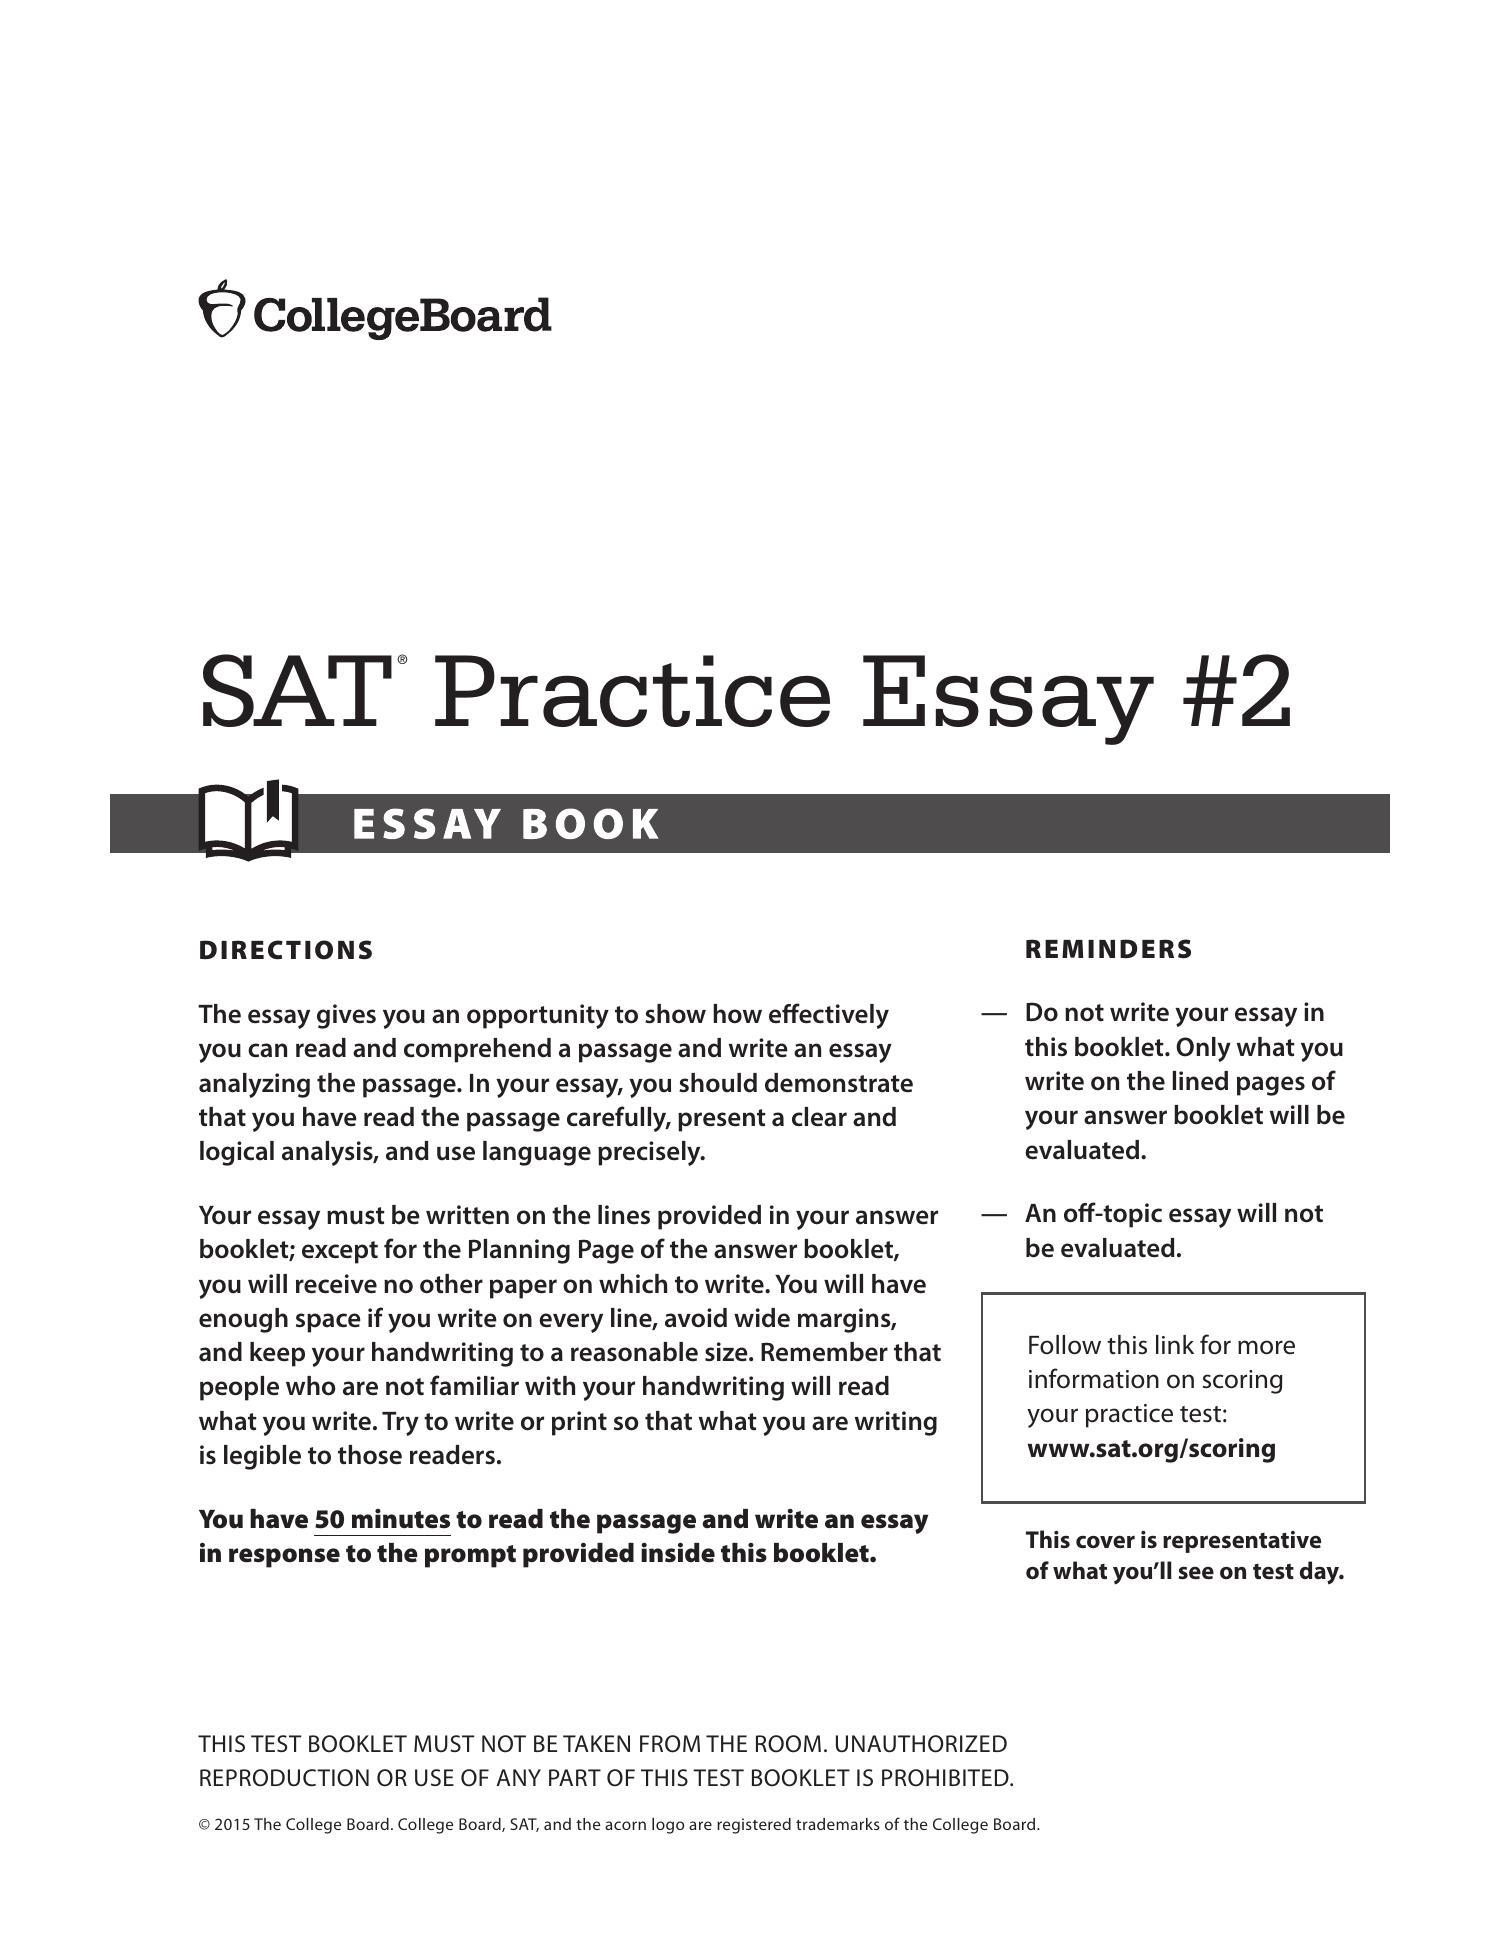 how to write an essay in sat